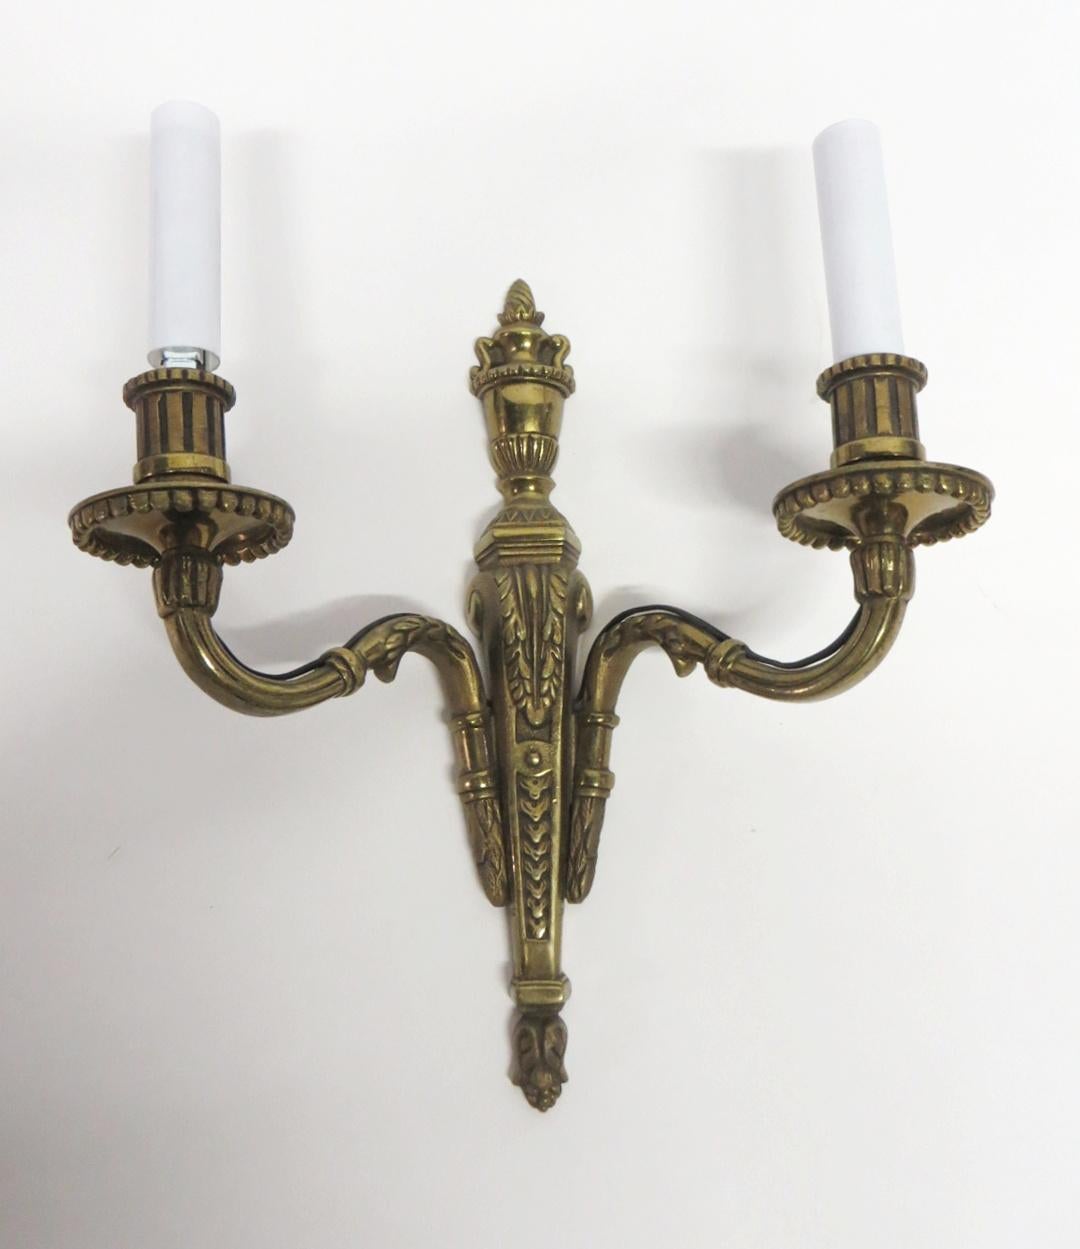 Bronze two arm candlestick sconces with an antique bronze patina from the 1940s. Priced as a pair. This can be seen at our 400 Gilligan St location in Scranton, PA.